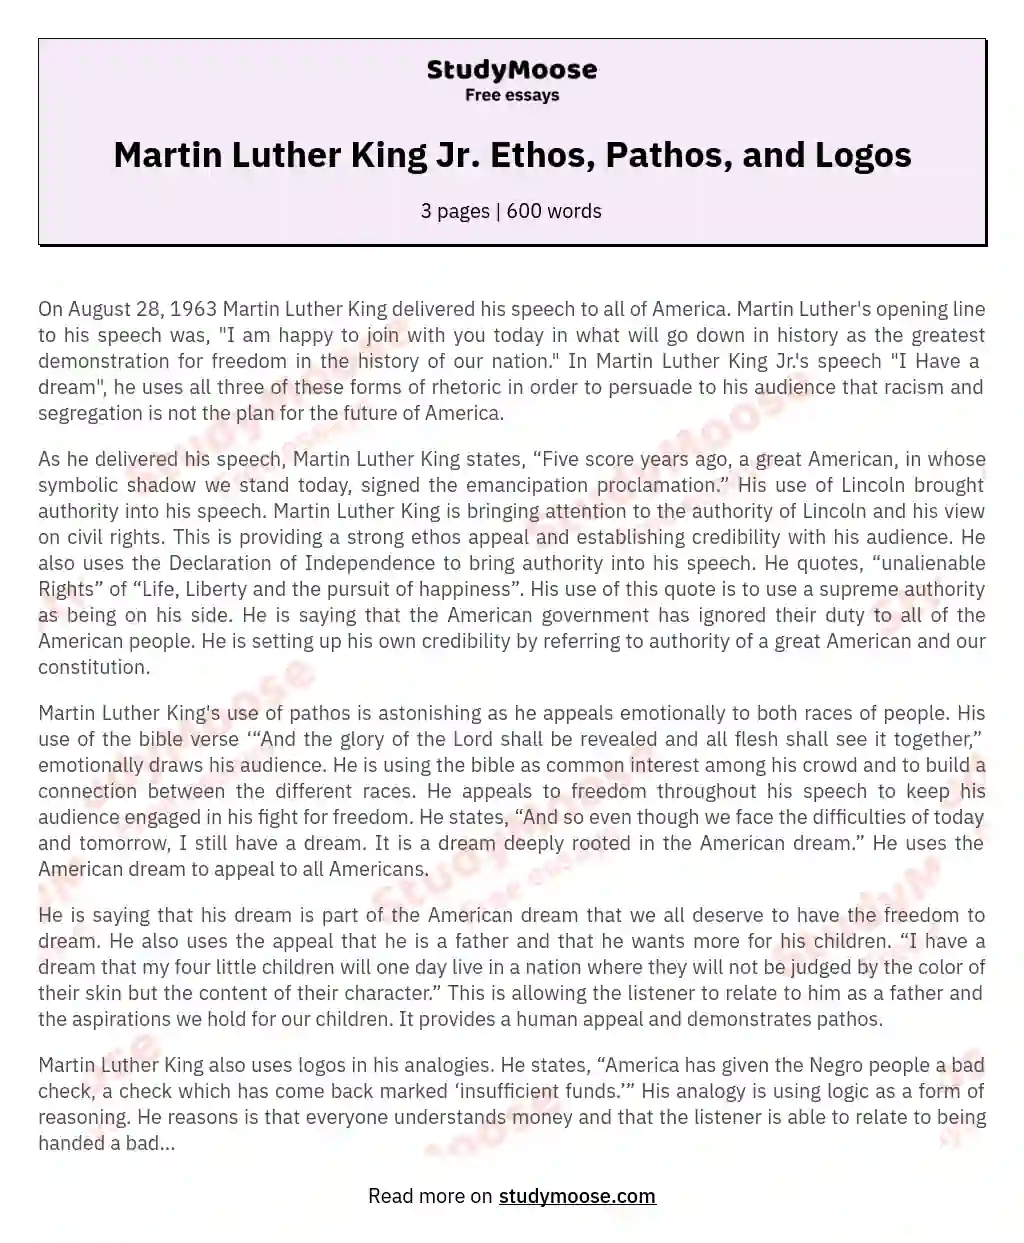 Martin Luther King Jr. Ethos, Pathos, and Logos essay